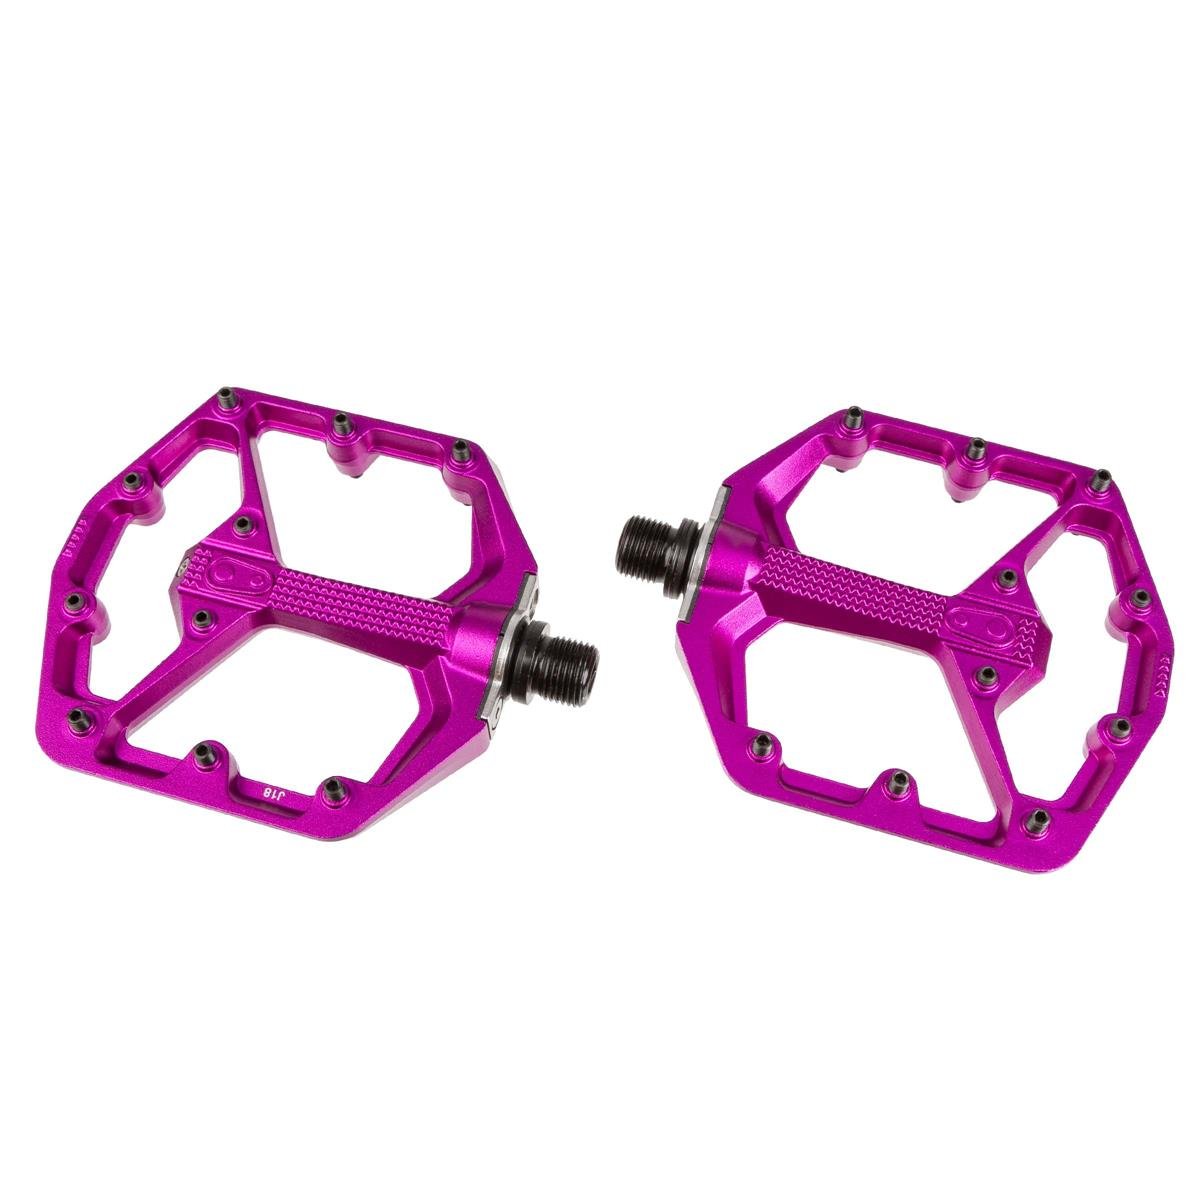 Crankbrothers Pédales Stamp 7 Limited Edition, Violet, Small